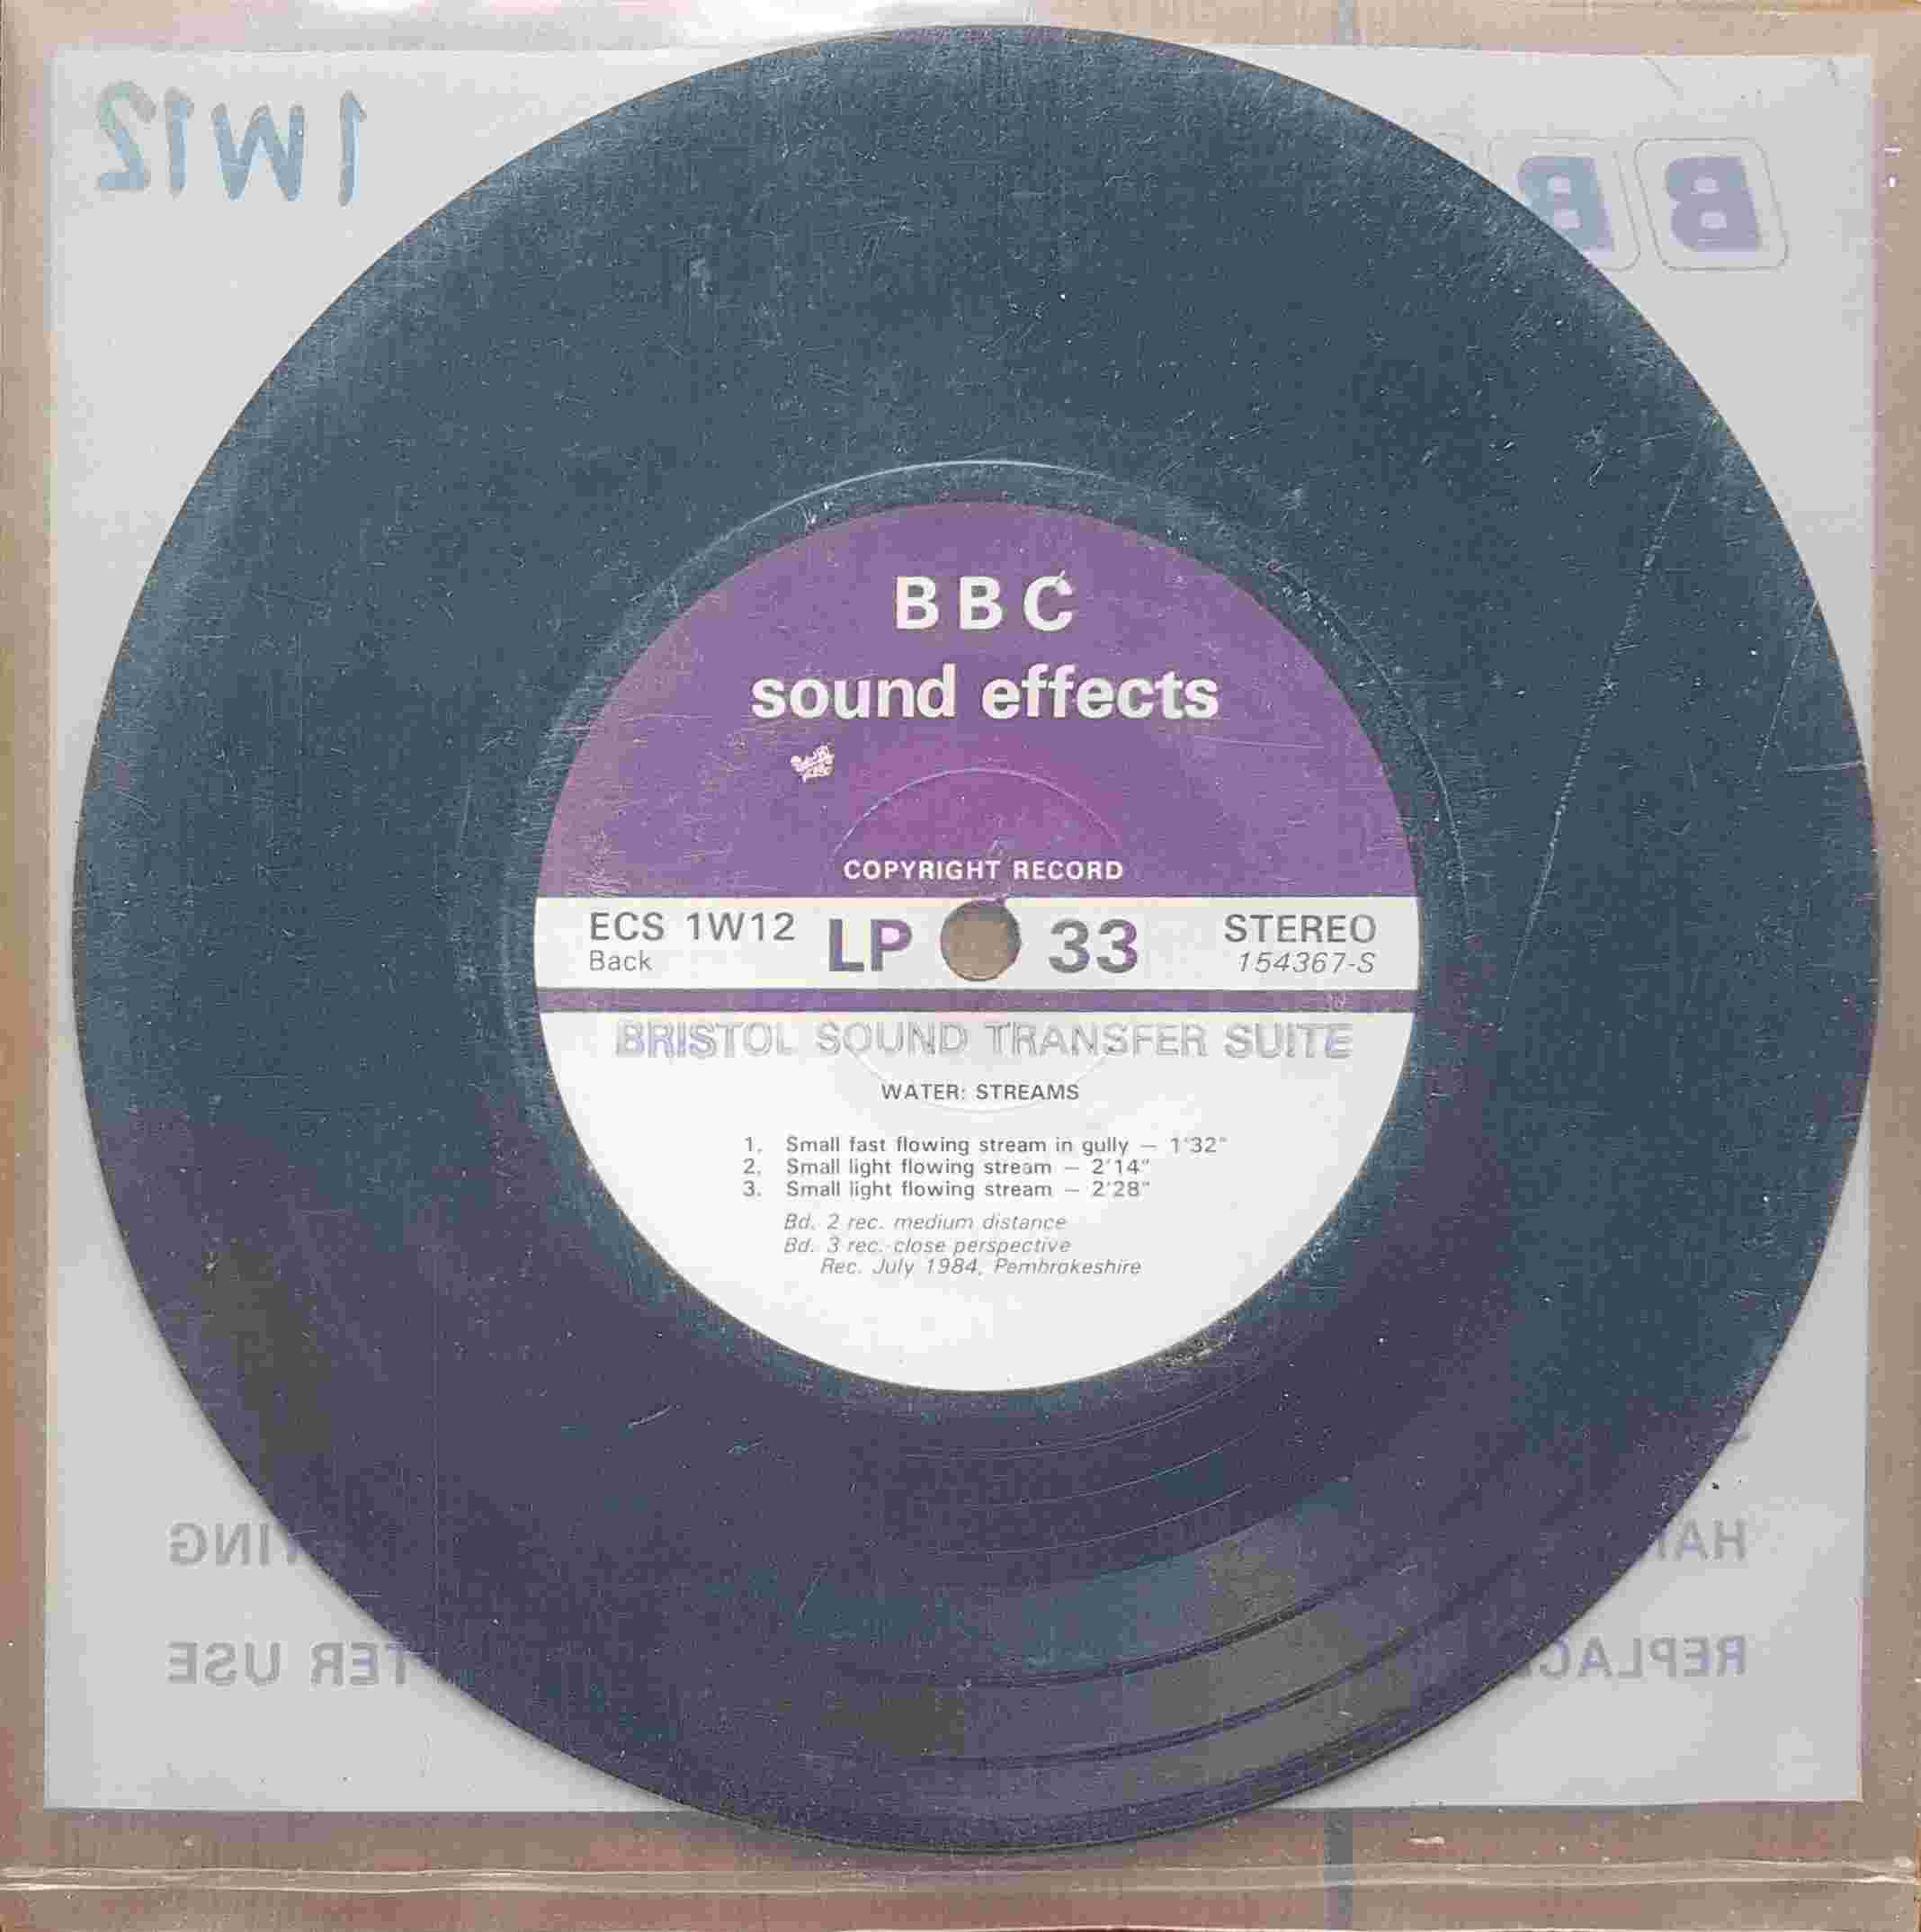 Picture of ECS 1W12 Water: Streams by artist Not registered from the BBC records and Tapes library